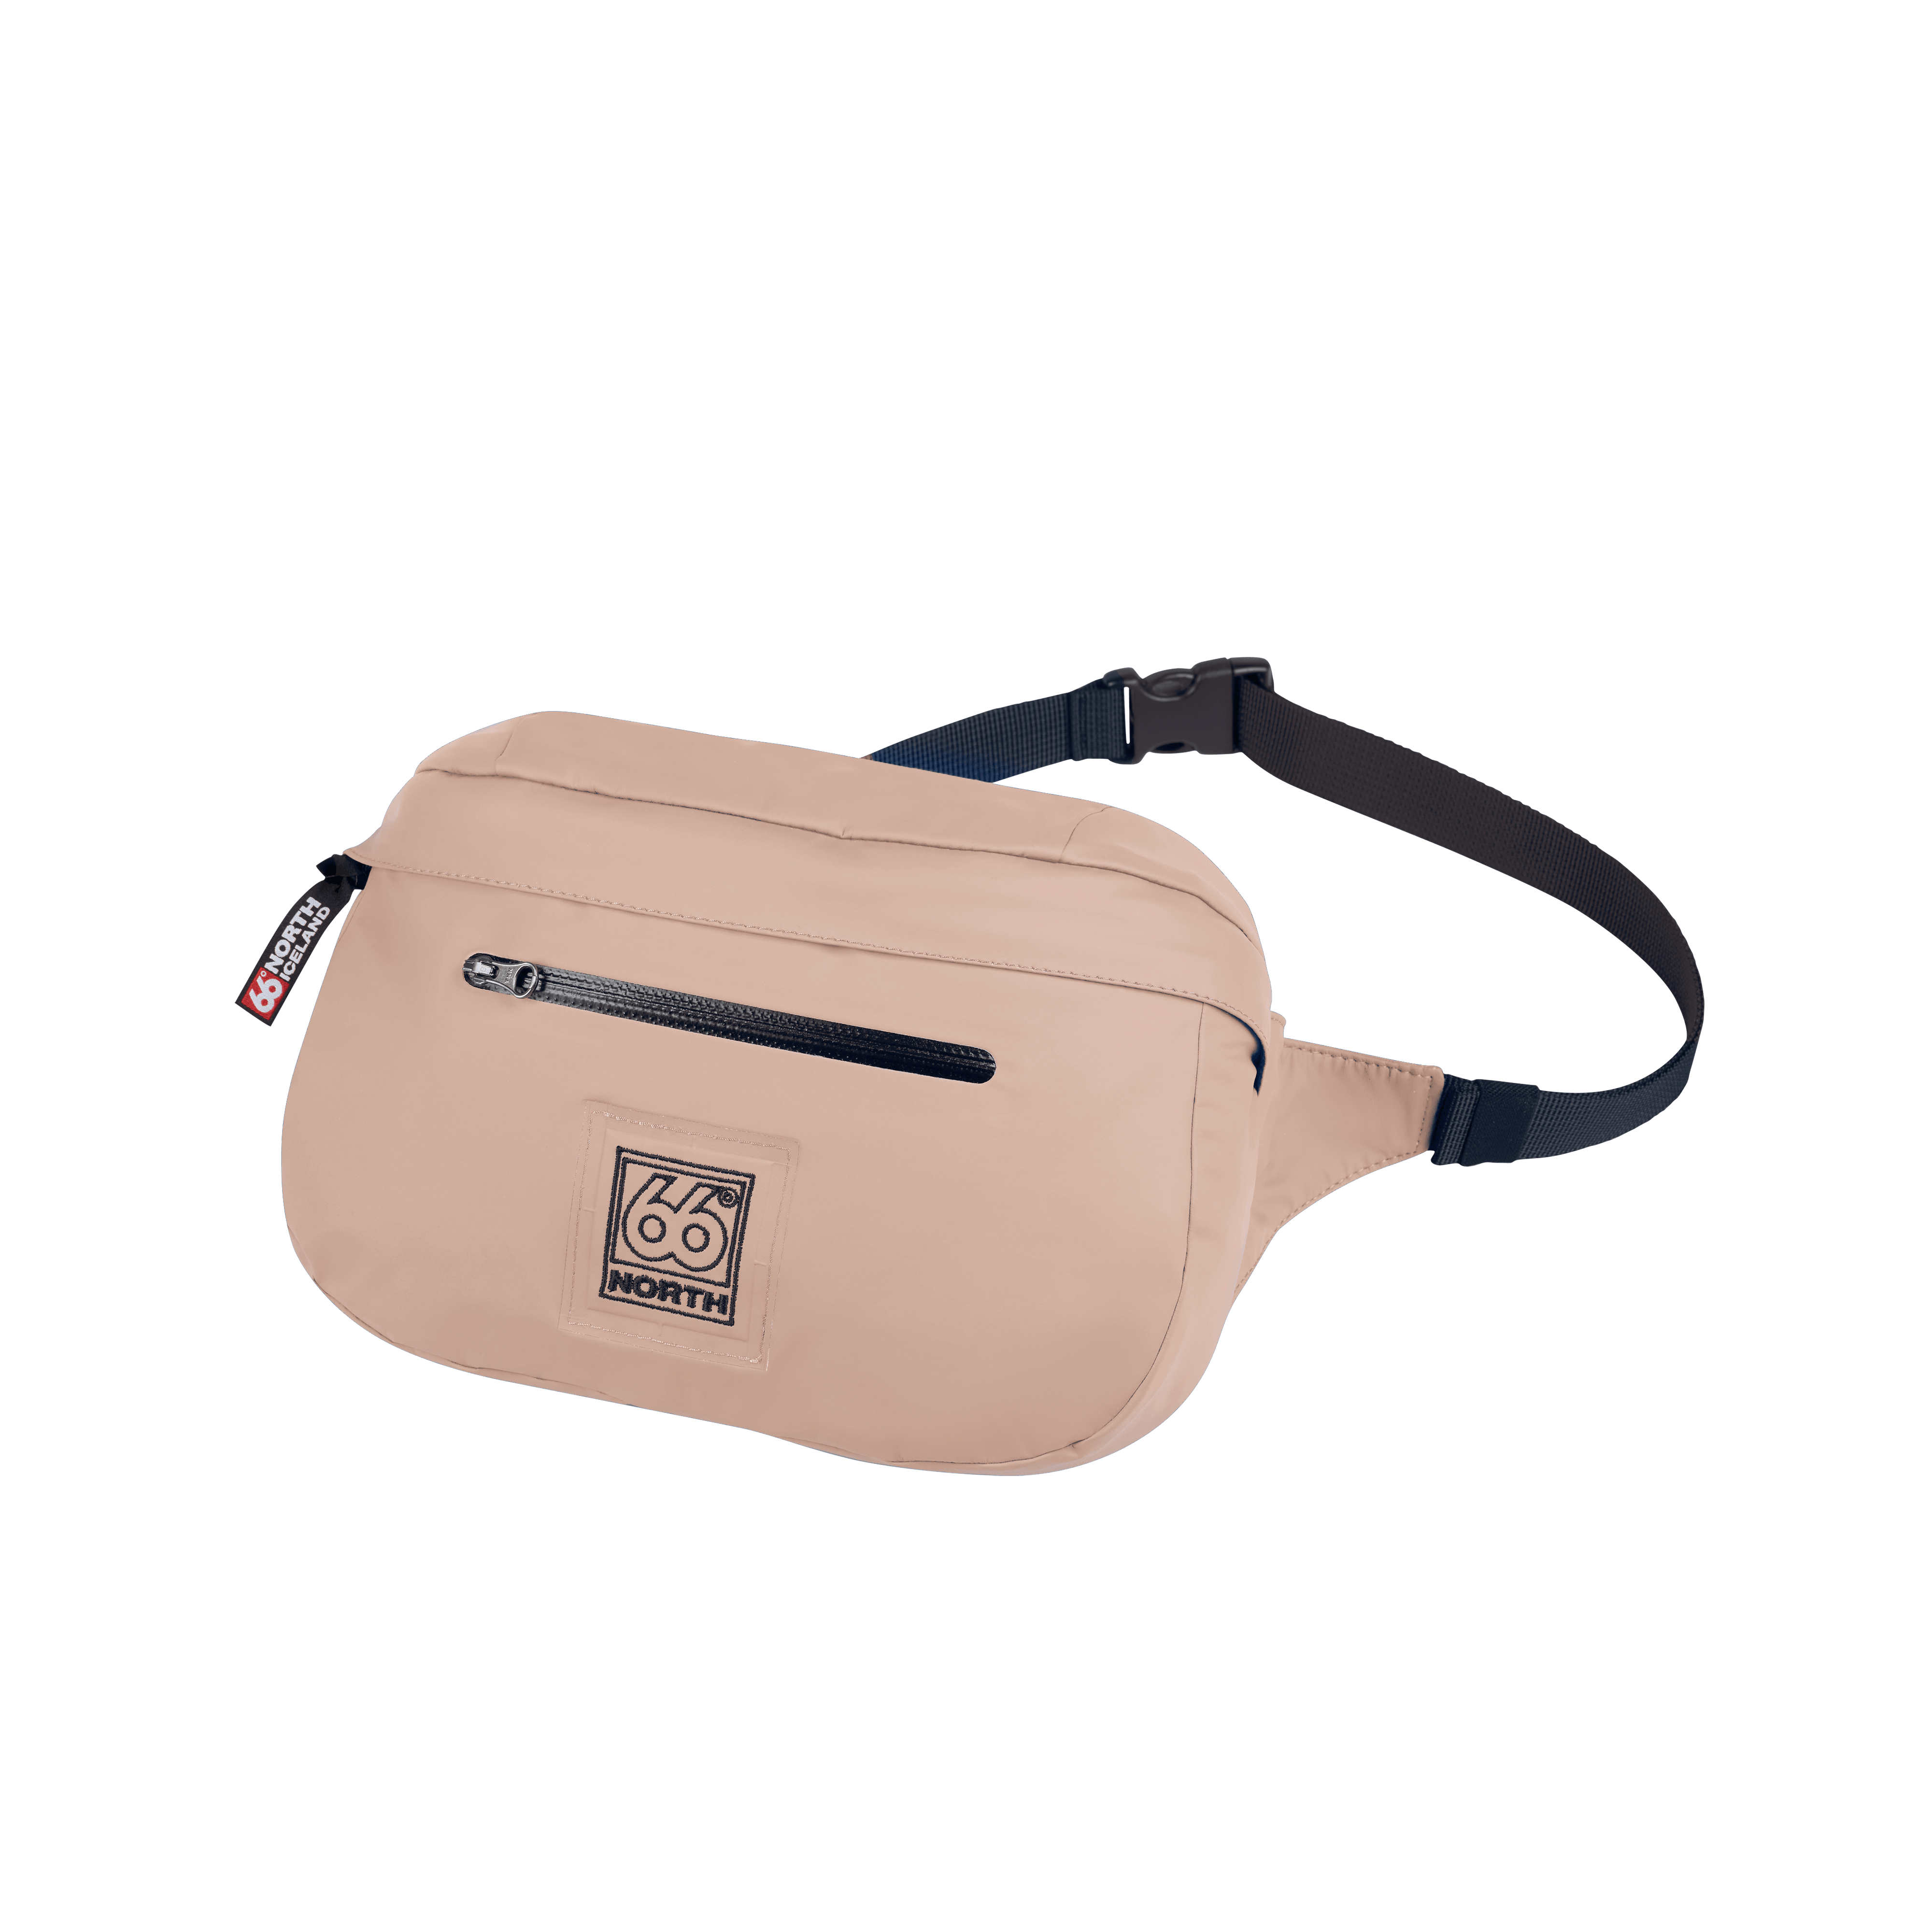 66 North Women's 66°north Accessories In Rose Sand 